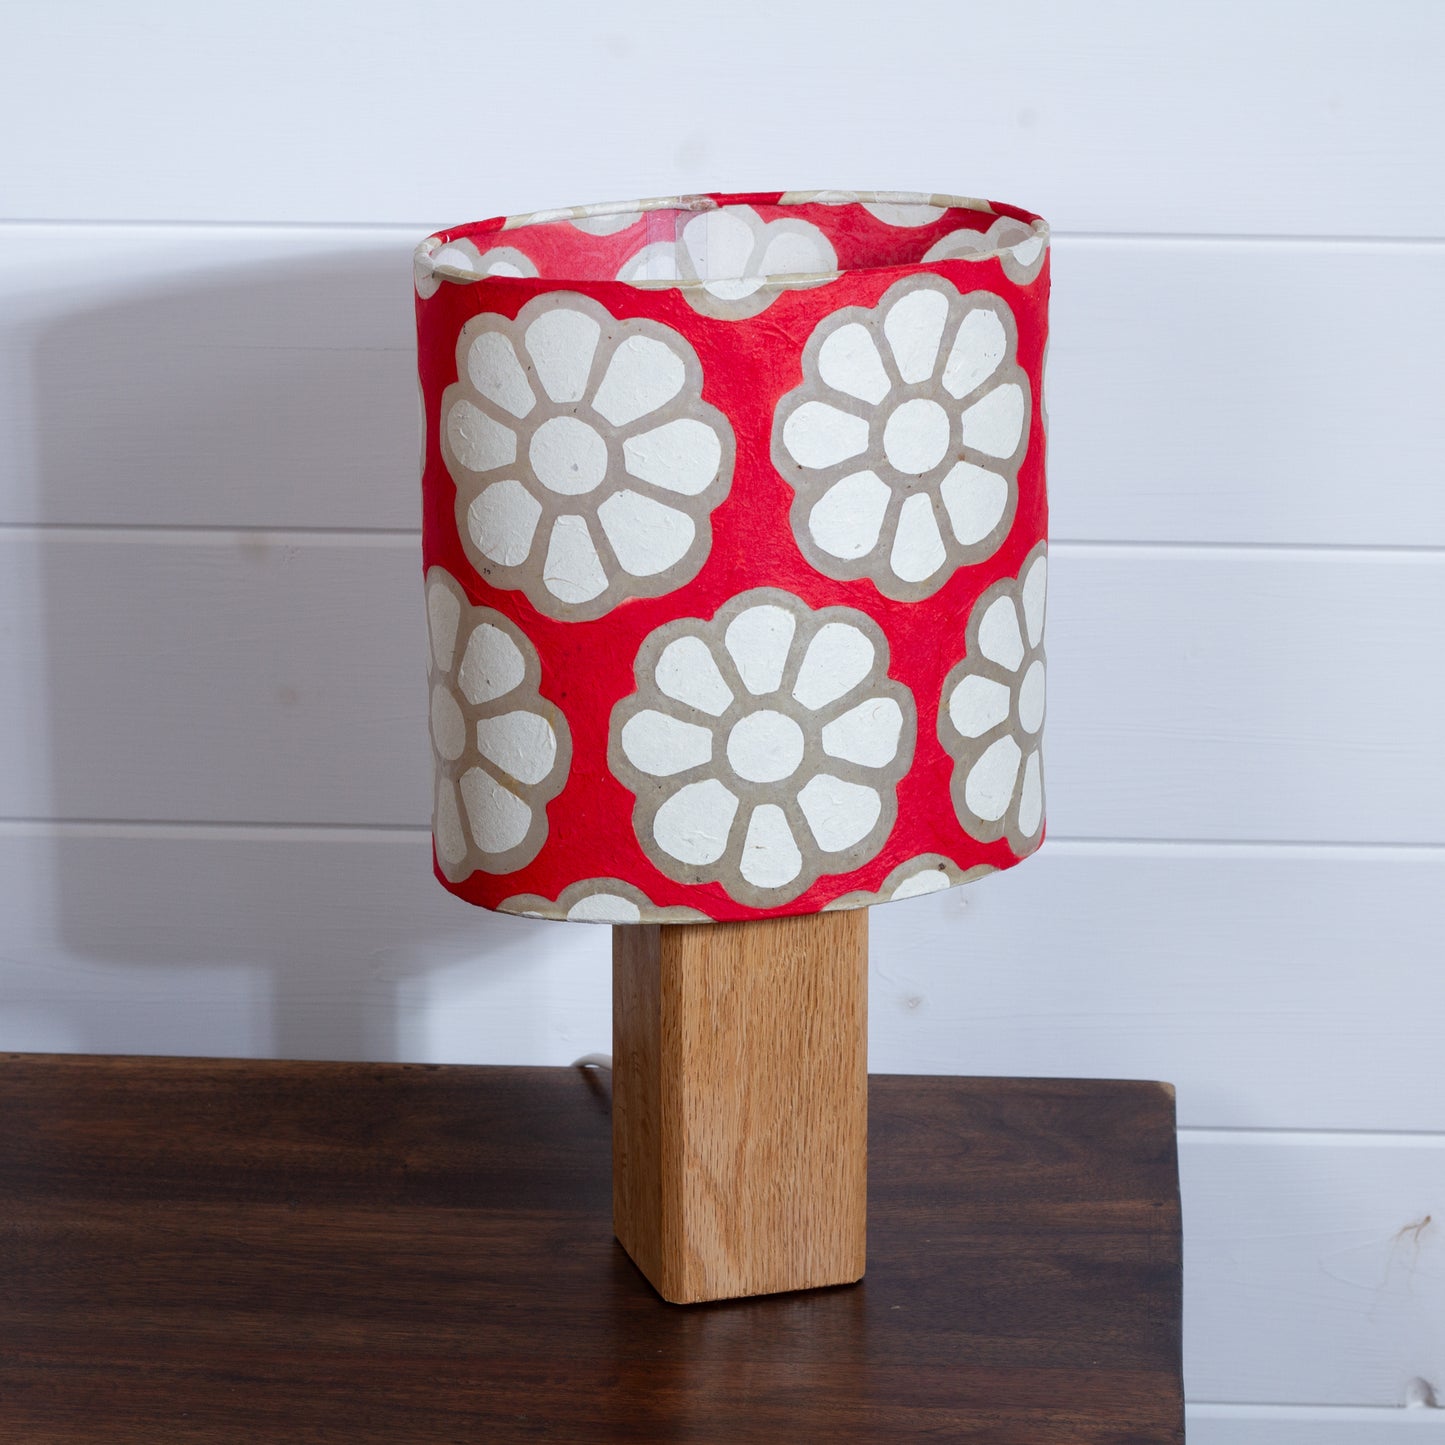 Square Oak Lamp Base with Oval Lamp shade in P18 - Batik Big Flower on Red